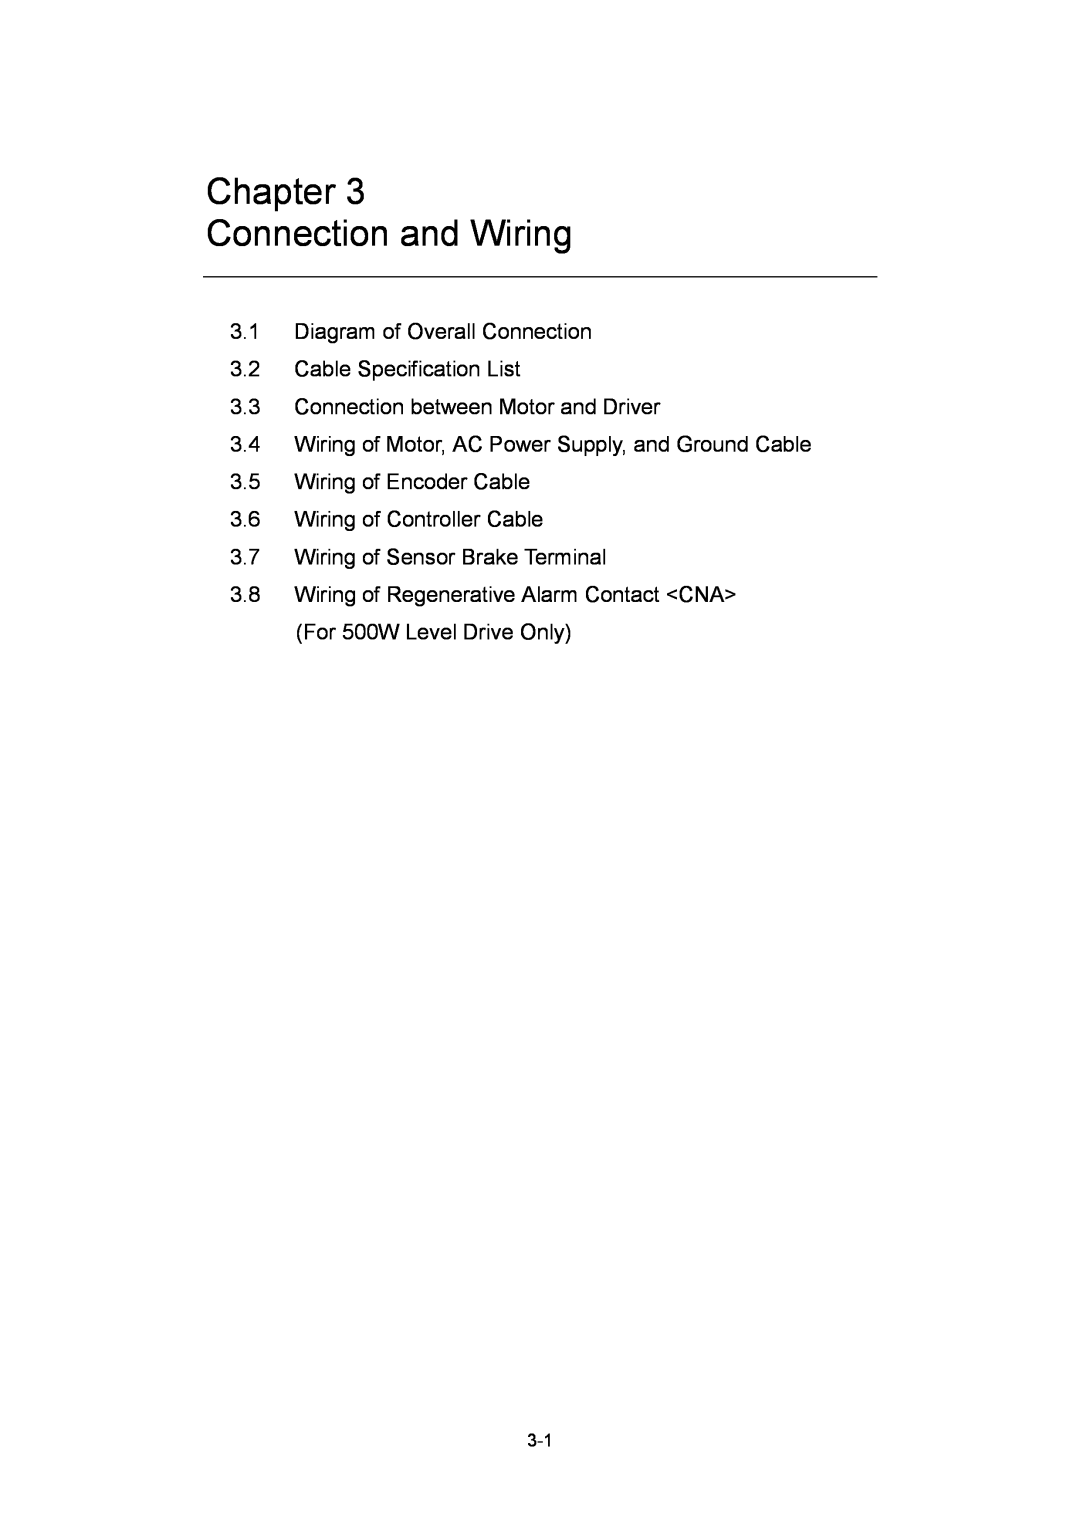 Parker Hannifin G2 manual Chapter Connection and Wiring, Diagram of Overall Connection 3.2 Cable Specification List 